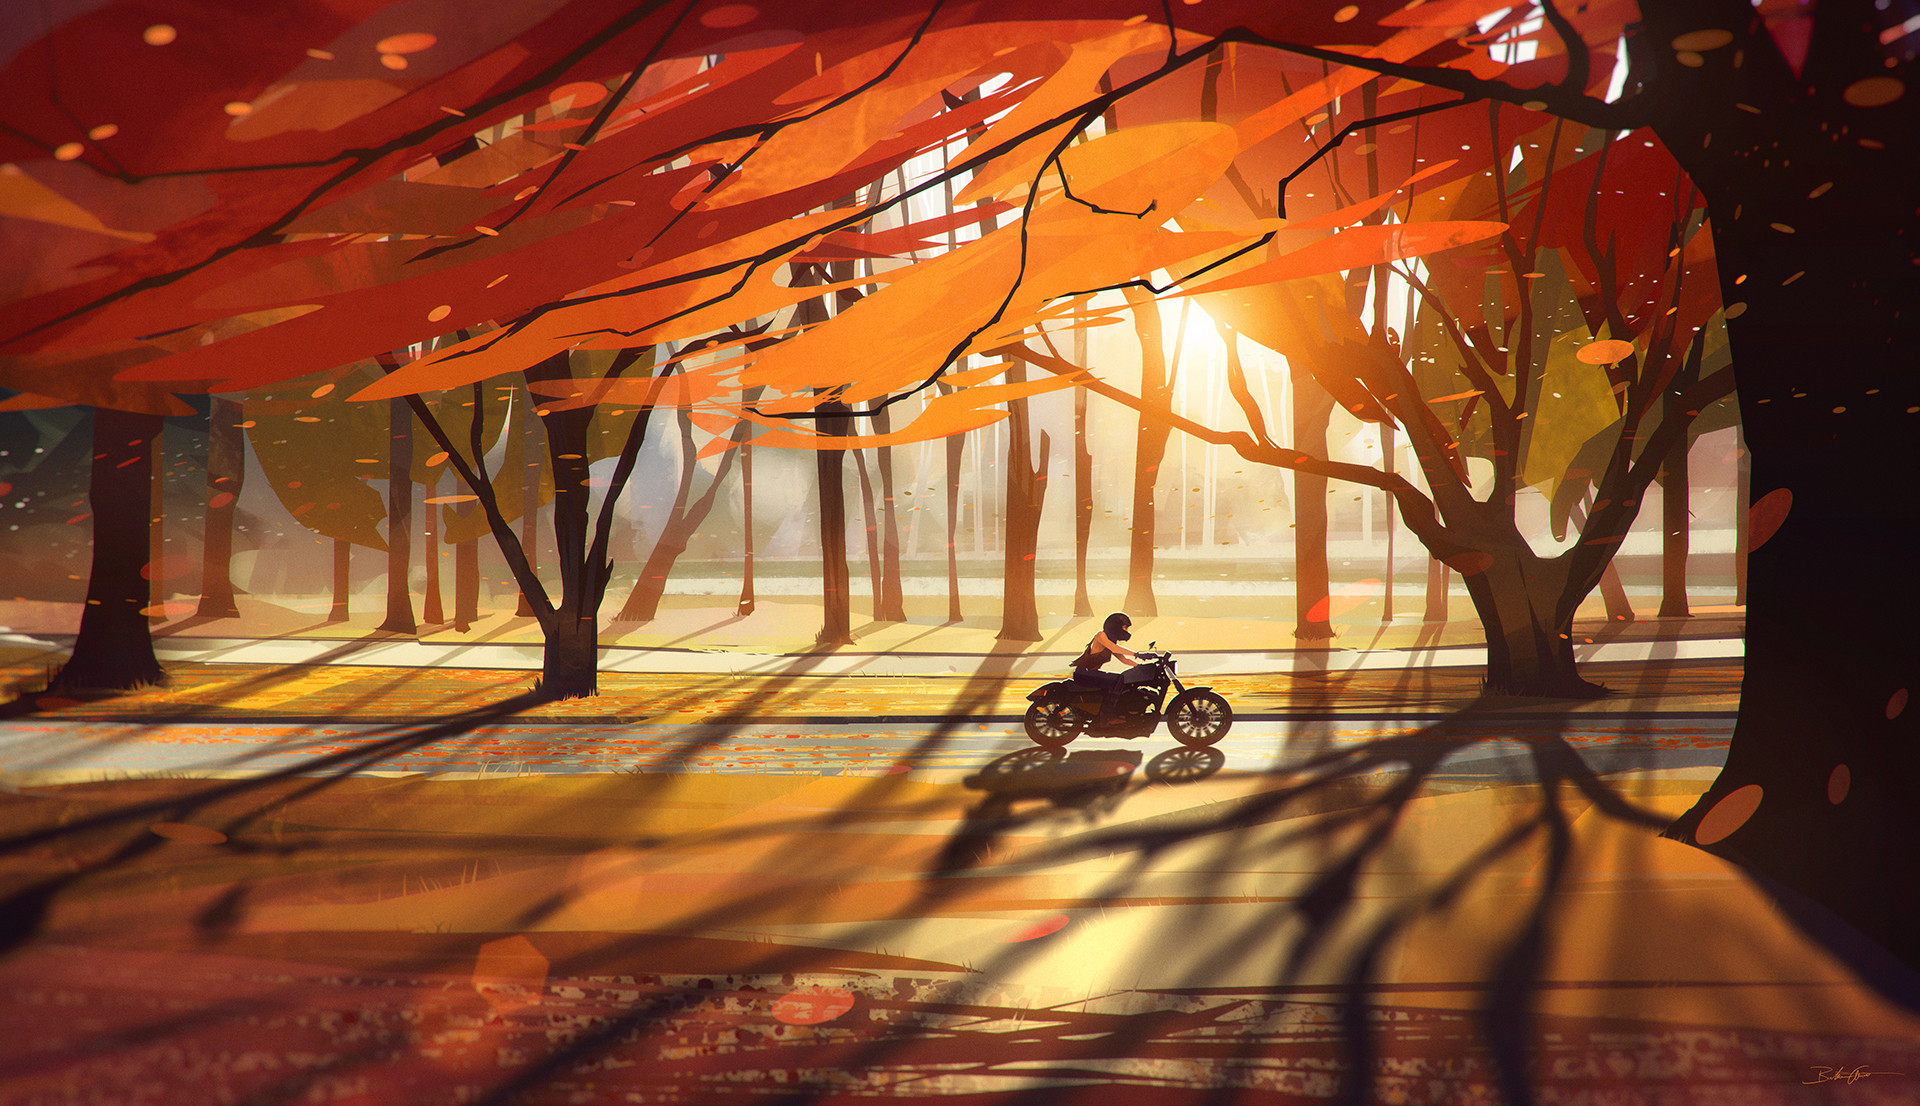 Autumn - Countryside by Bastien Grivet